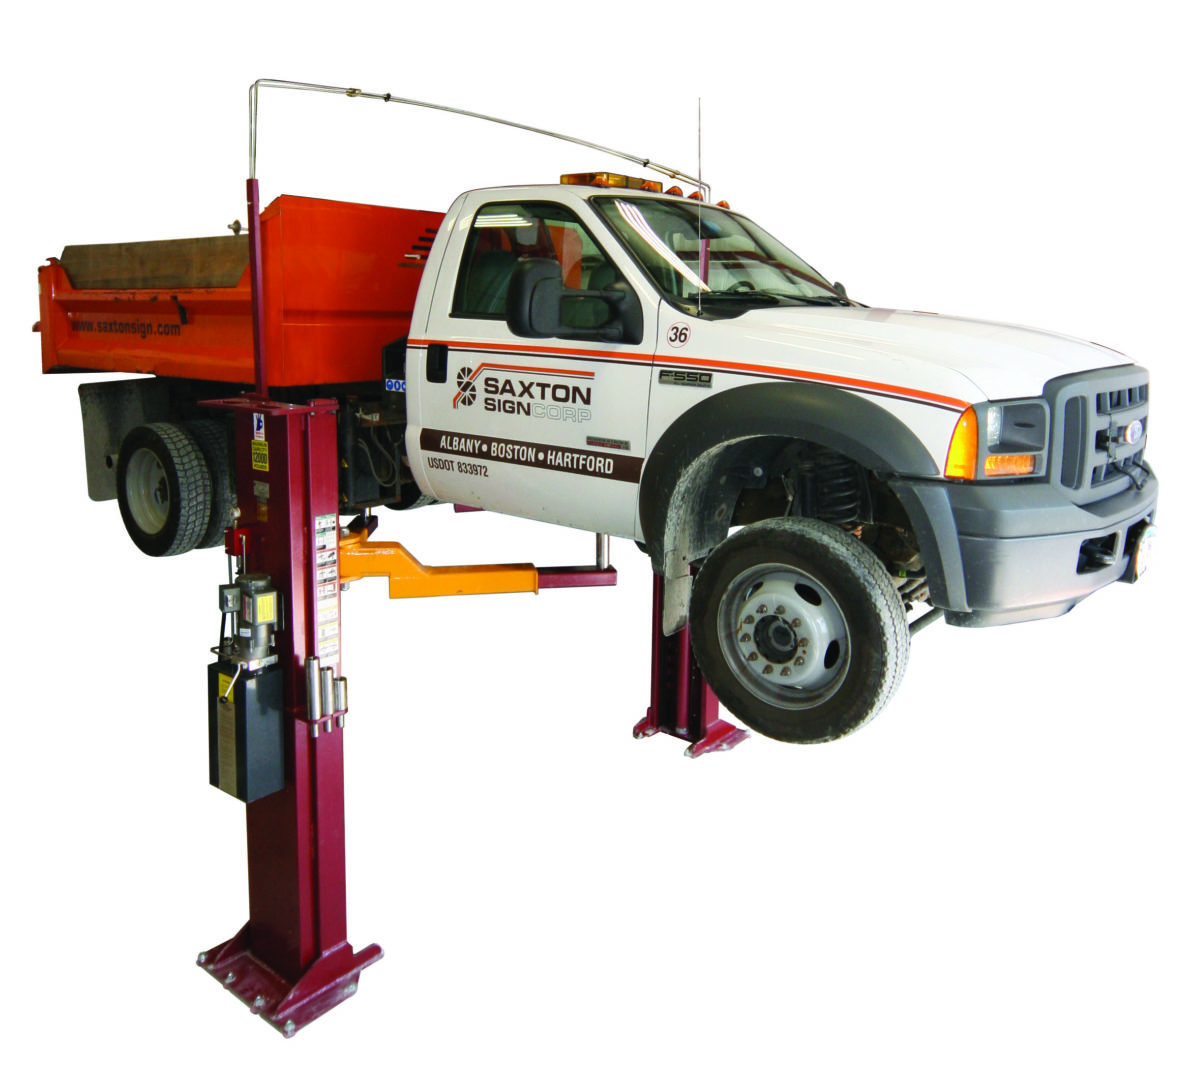 Mohawk Lifts (USA) LC12 12K Capacity 2 Post Lift for Low Ceiling